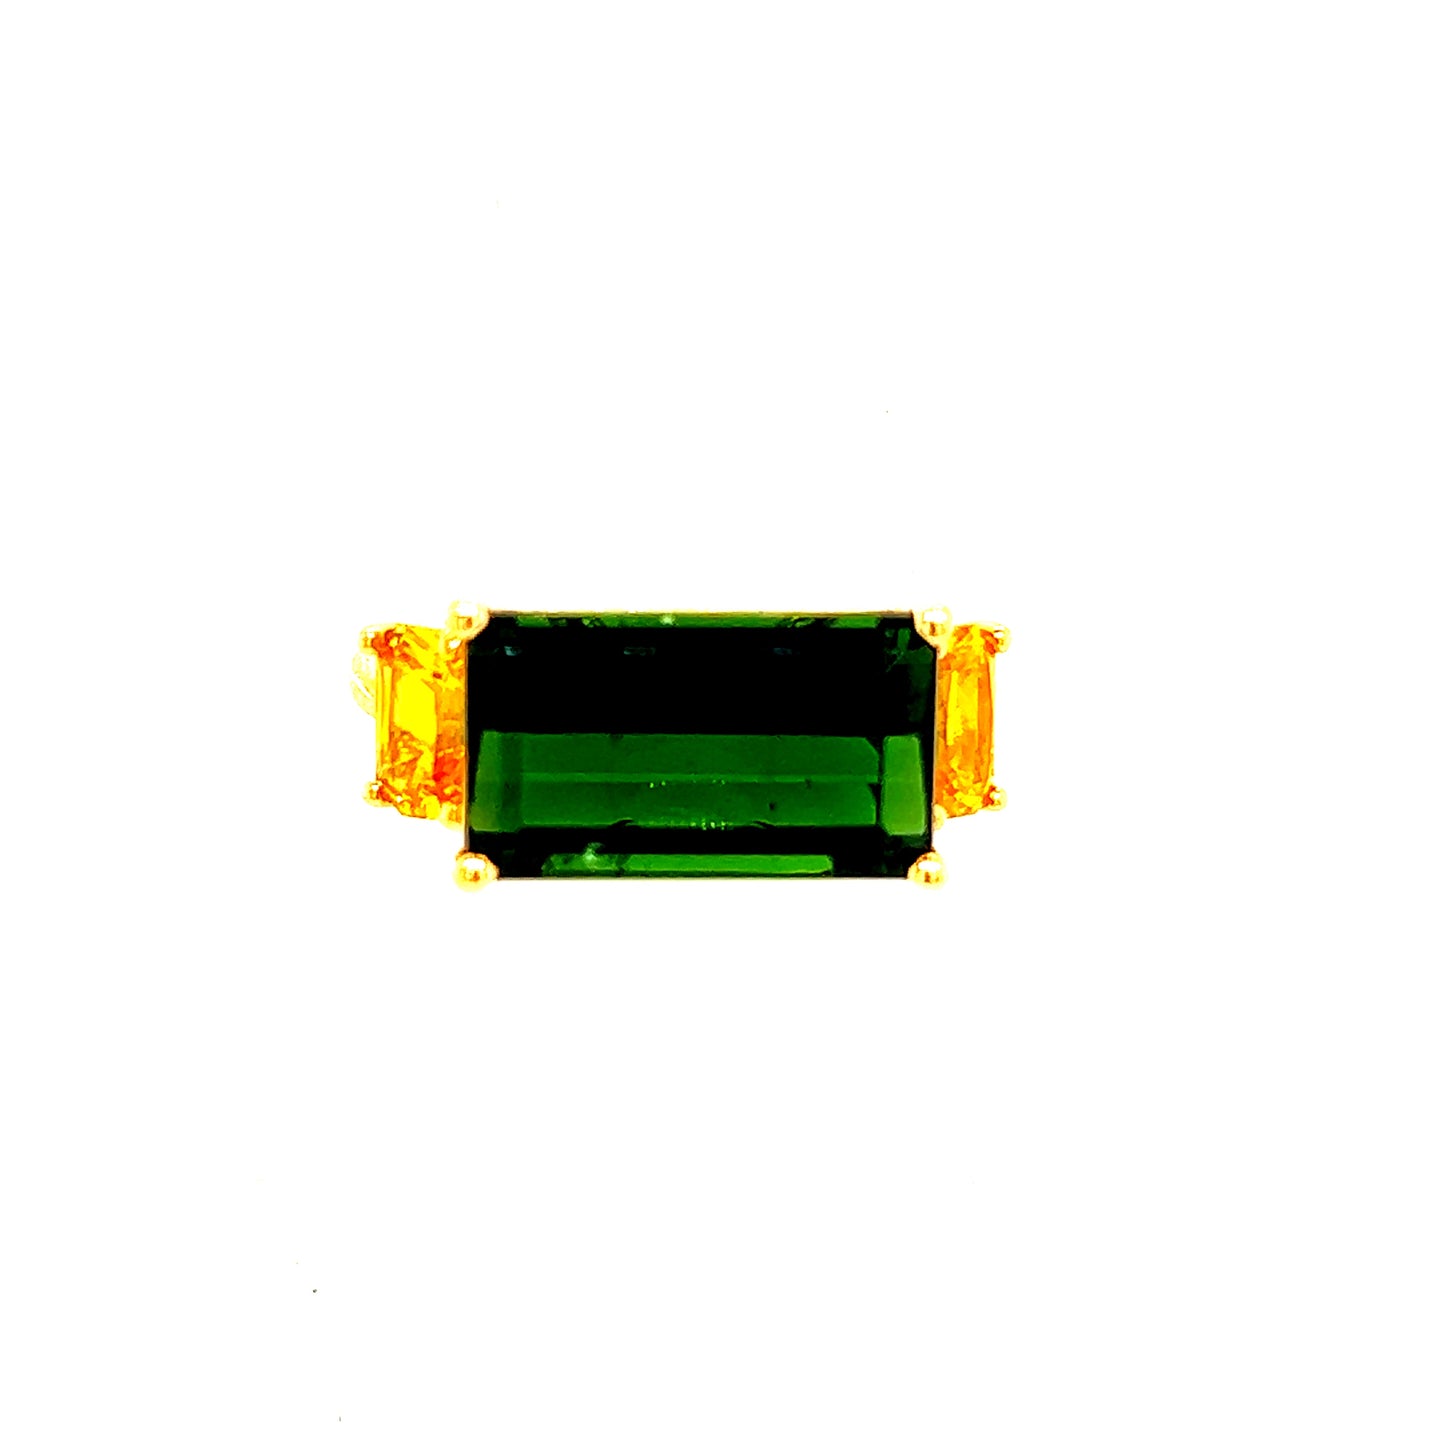 Natural Tourmaline Diamond Ring Size 7 14 Y Gold 7.03 TCW Certified $6,490 219226 - Certified Fine Jewelry